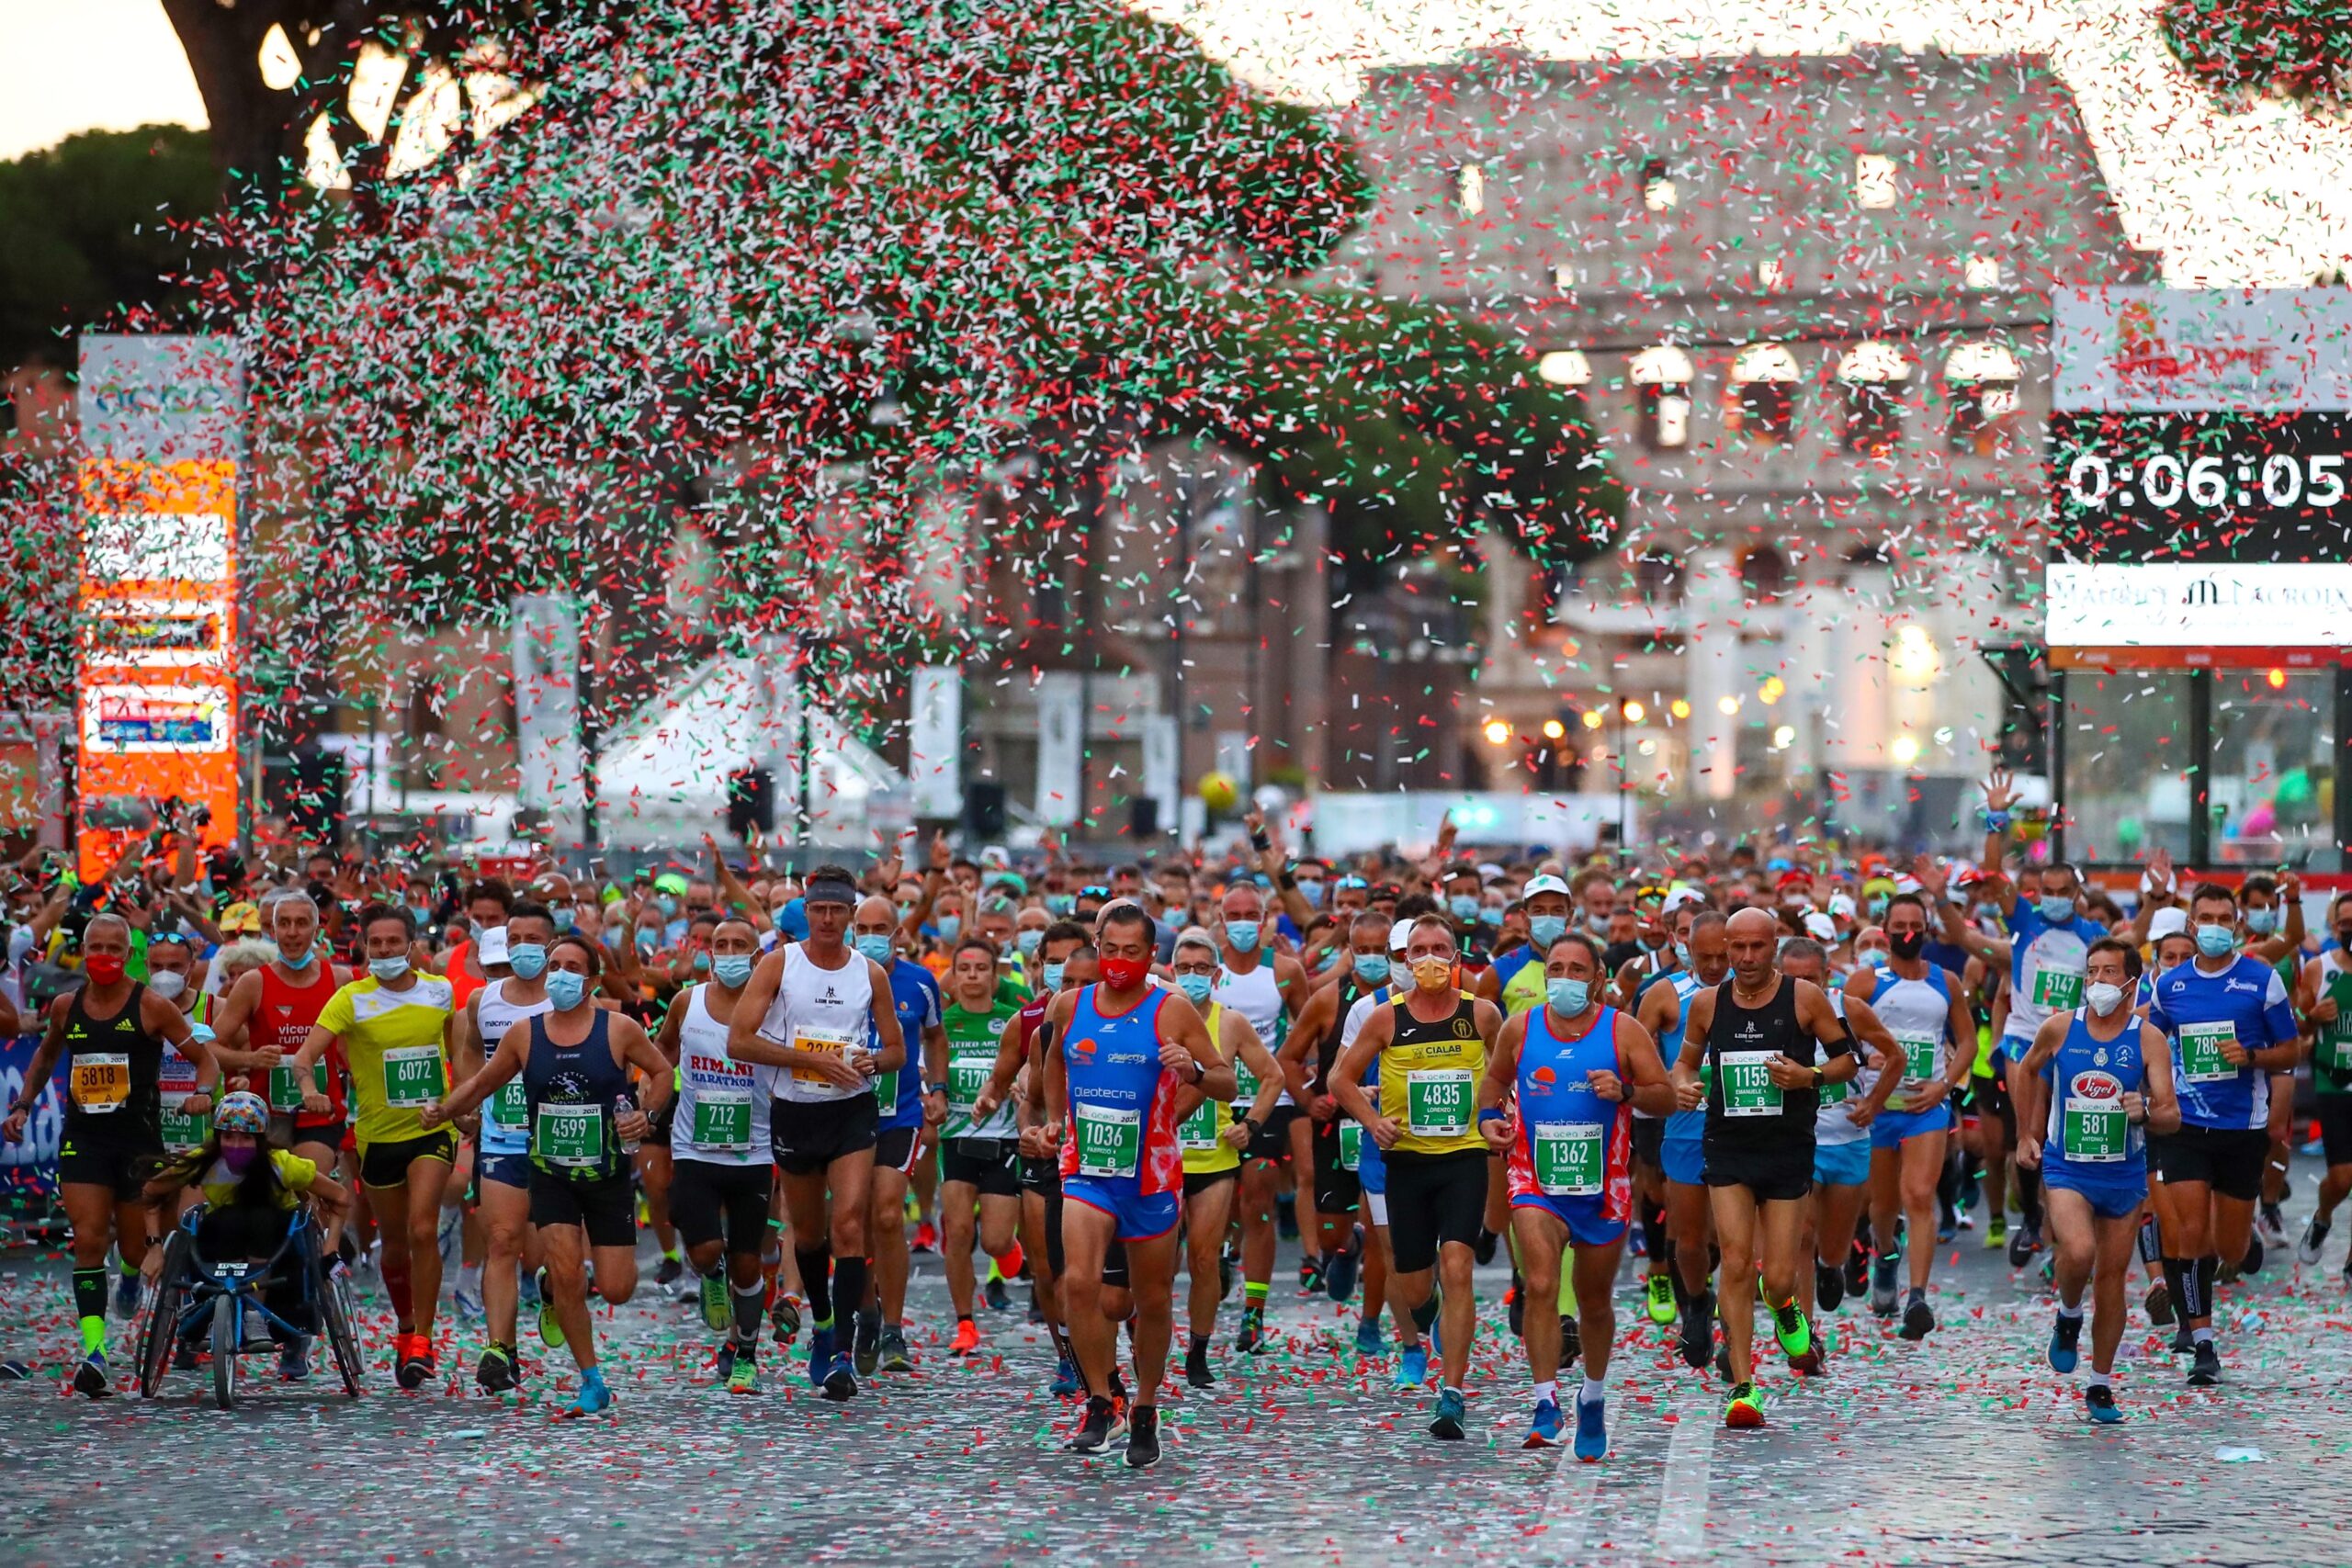 The figures of Acea Run Rome the Marathon: 11 thousand starters, including more than 2400 women and 1830 Roman runners.